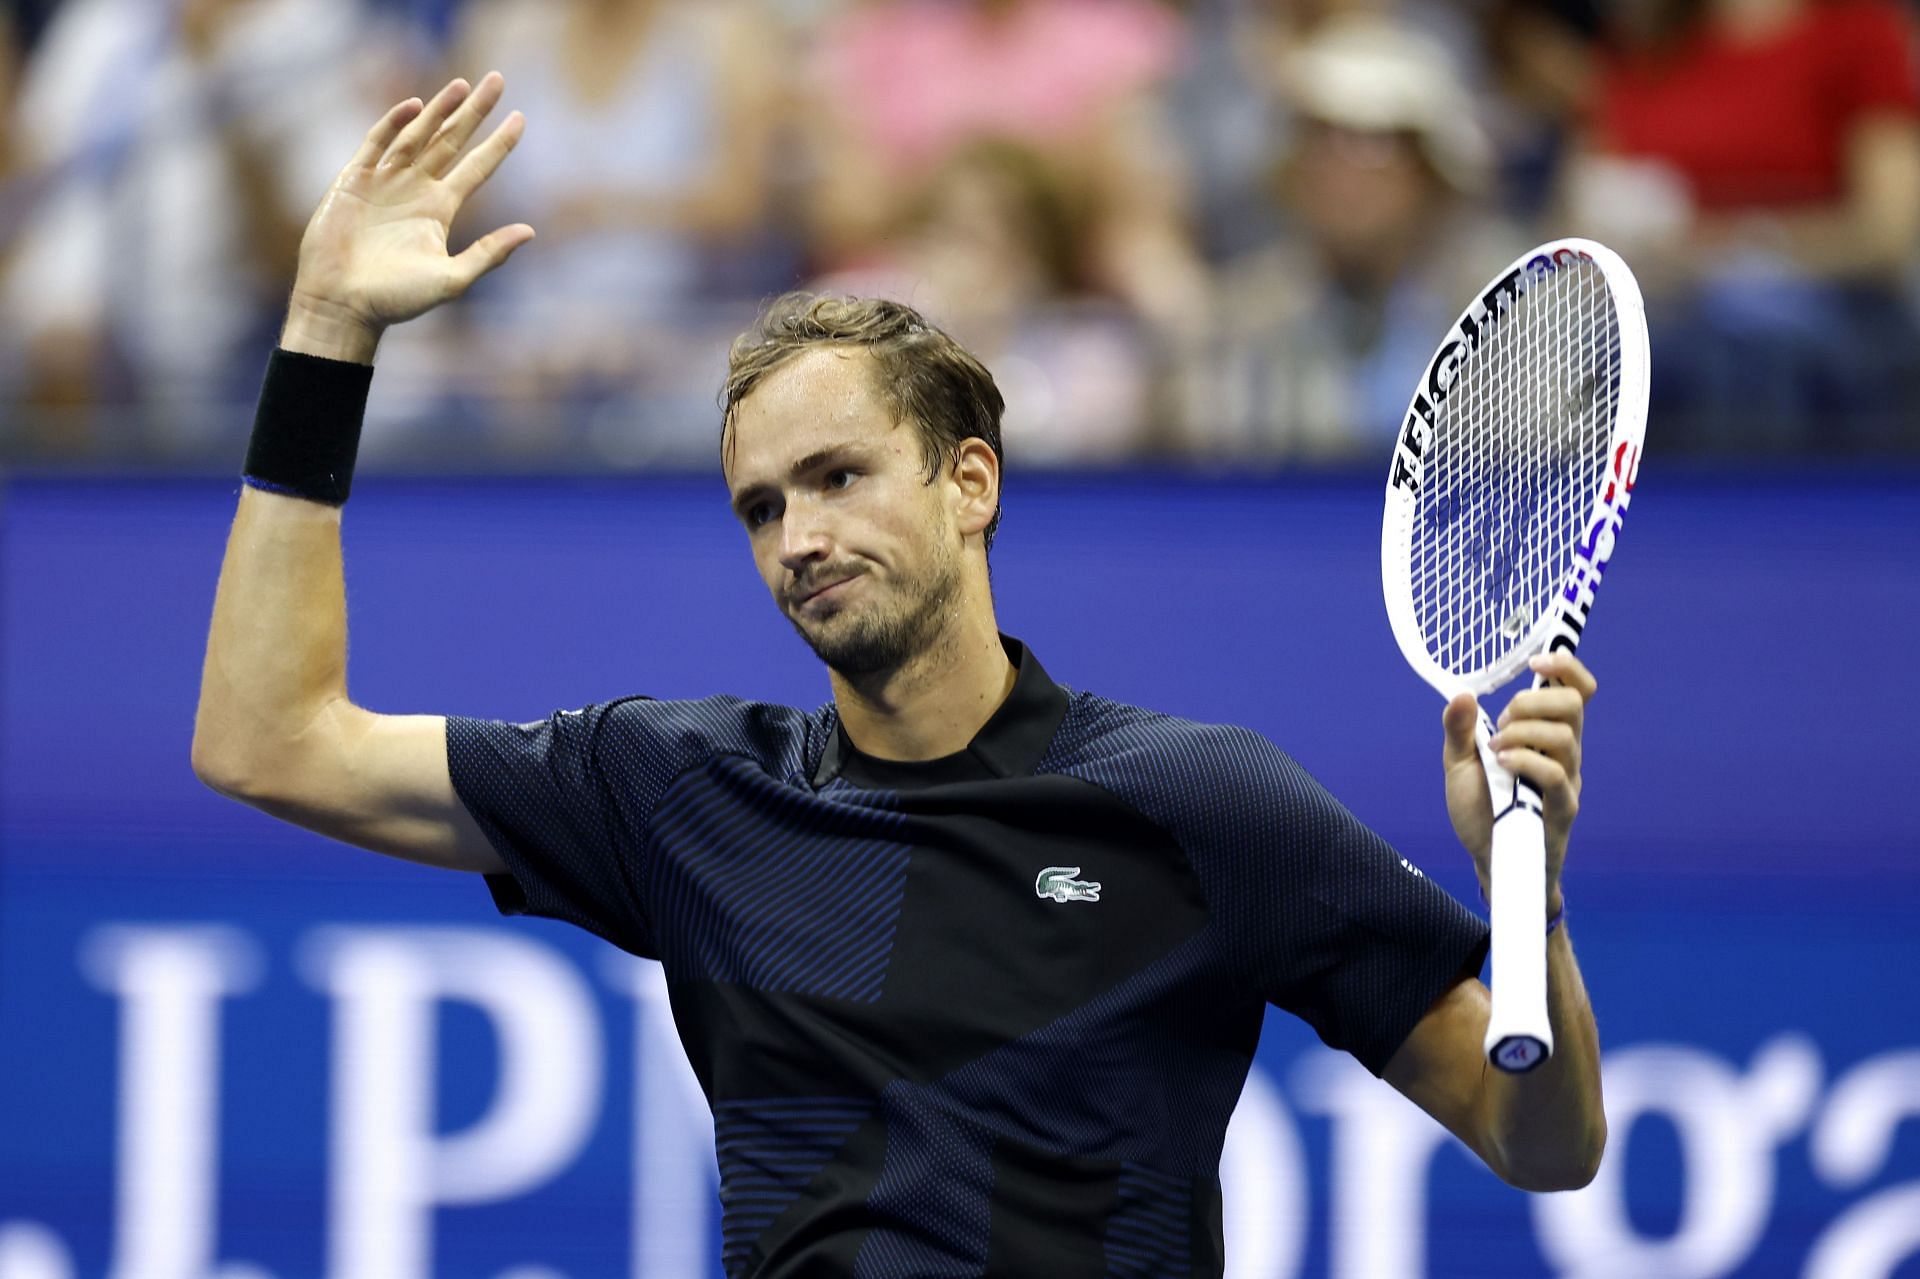 Daniil Medvedev failed to defend his US Open title this year.